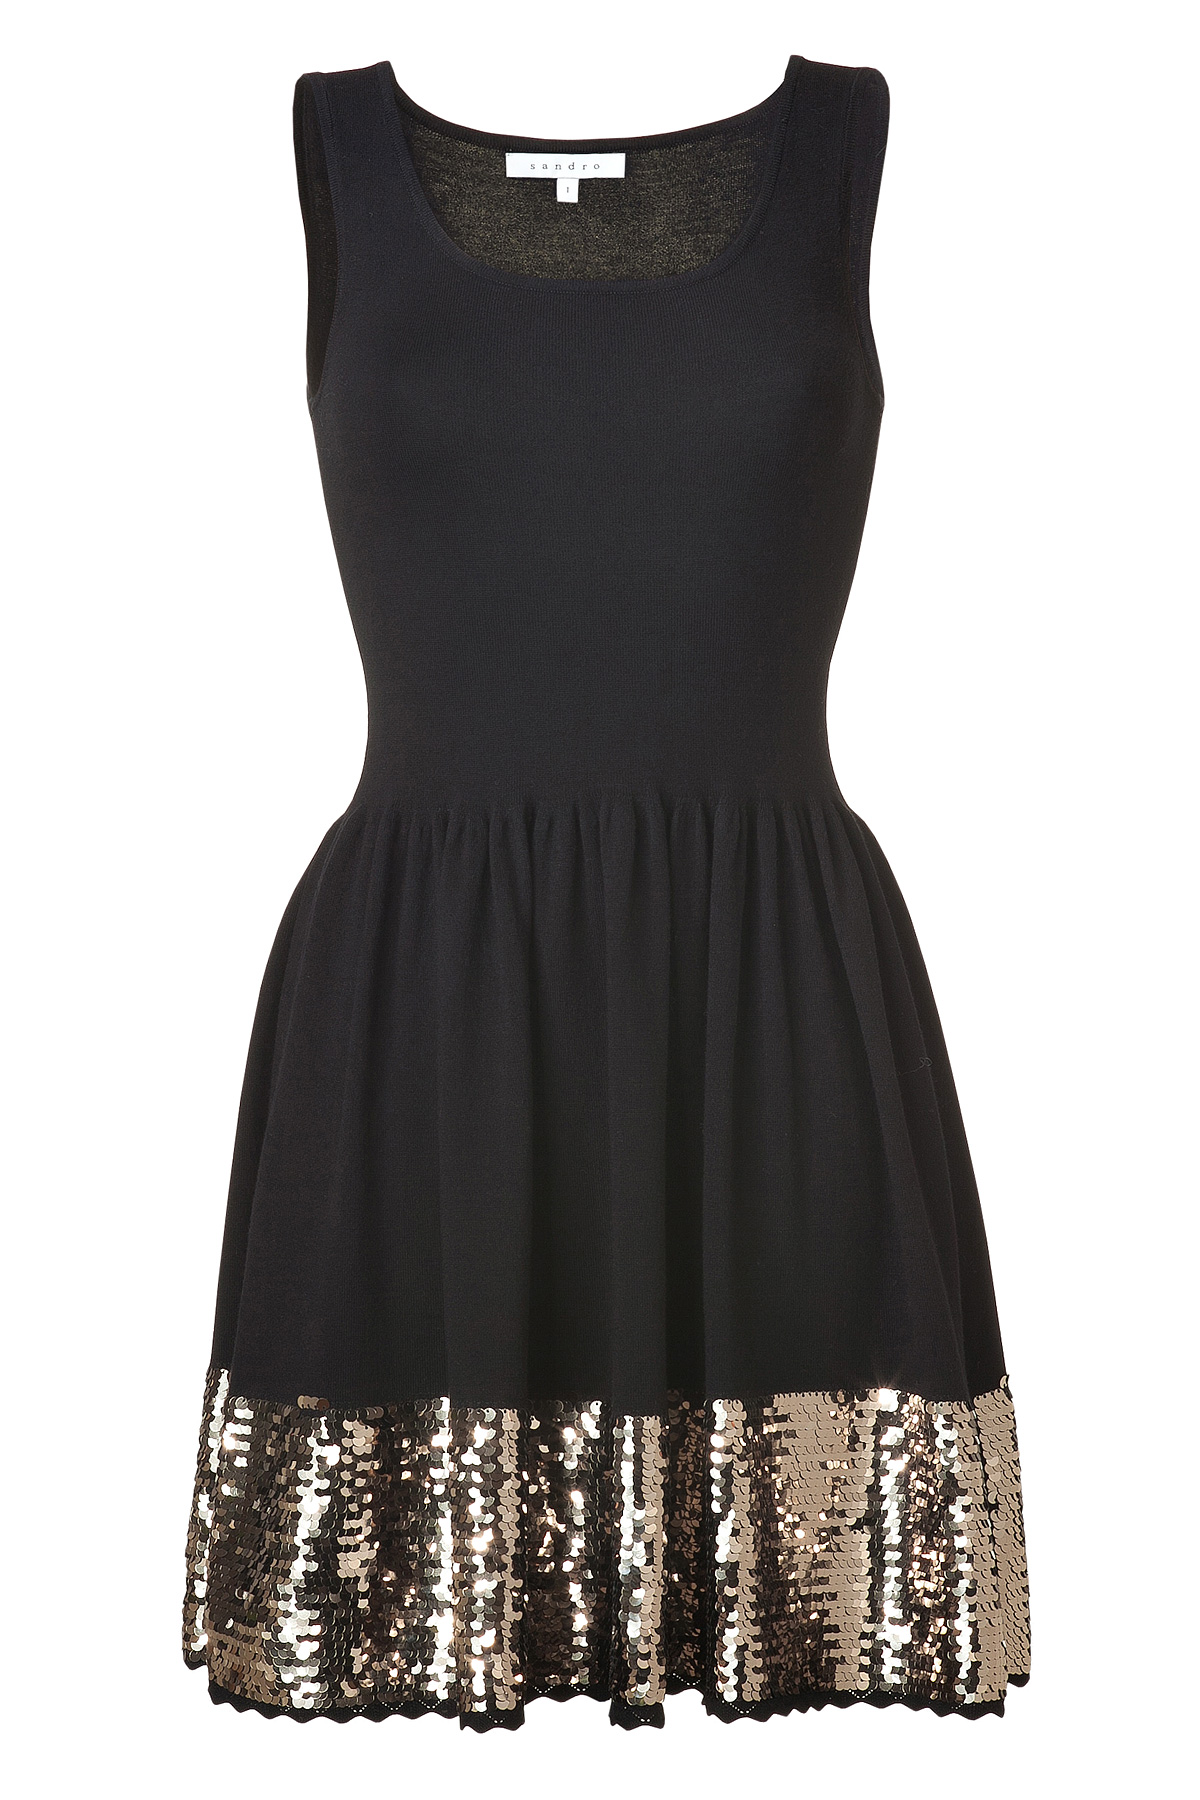 Stylebop Sandro Black with gold sequins Bridesmaids Dress